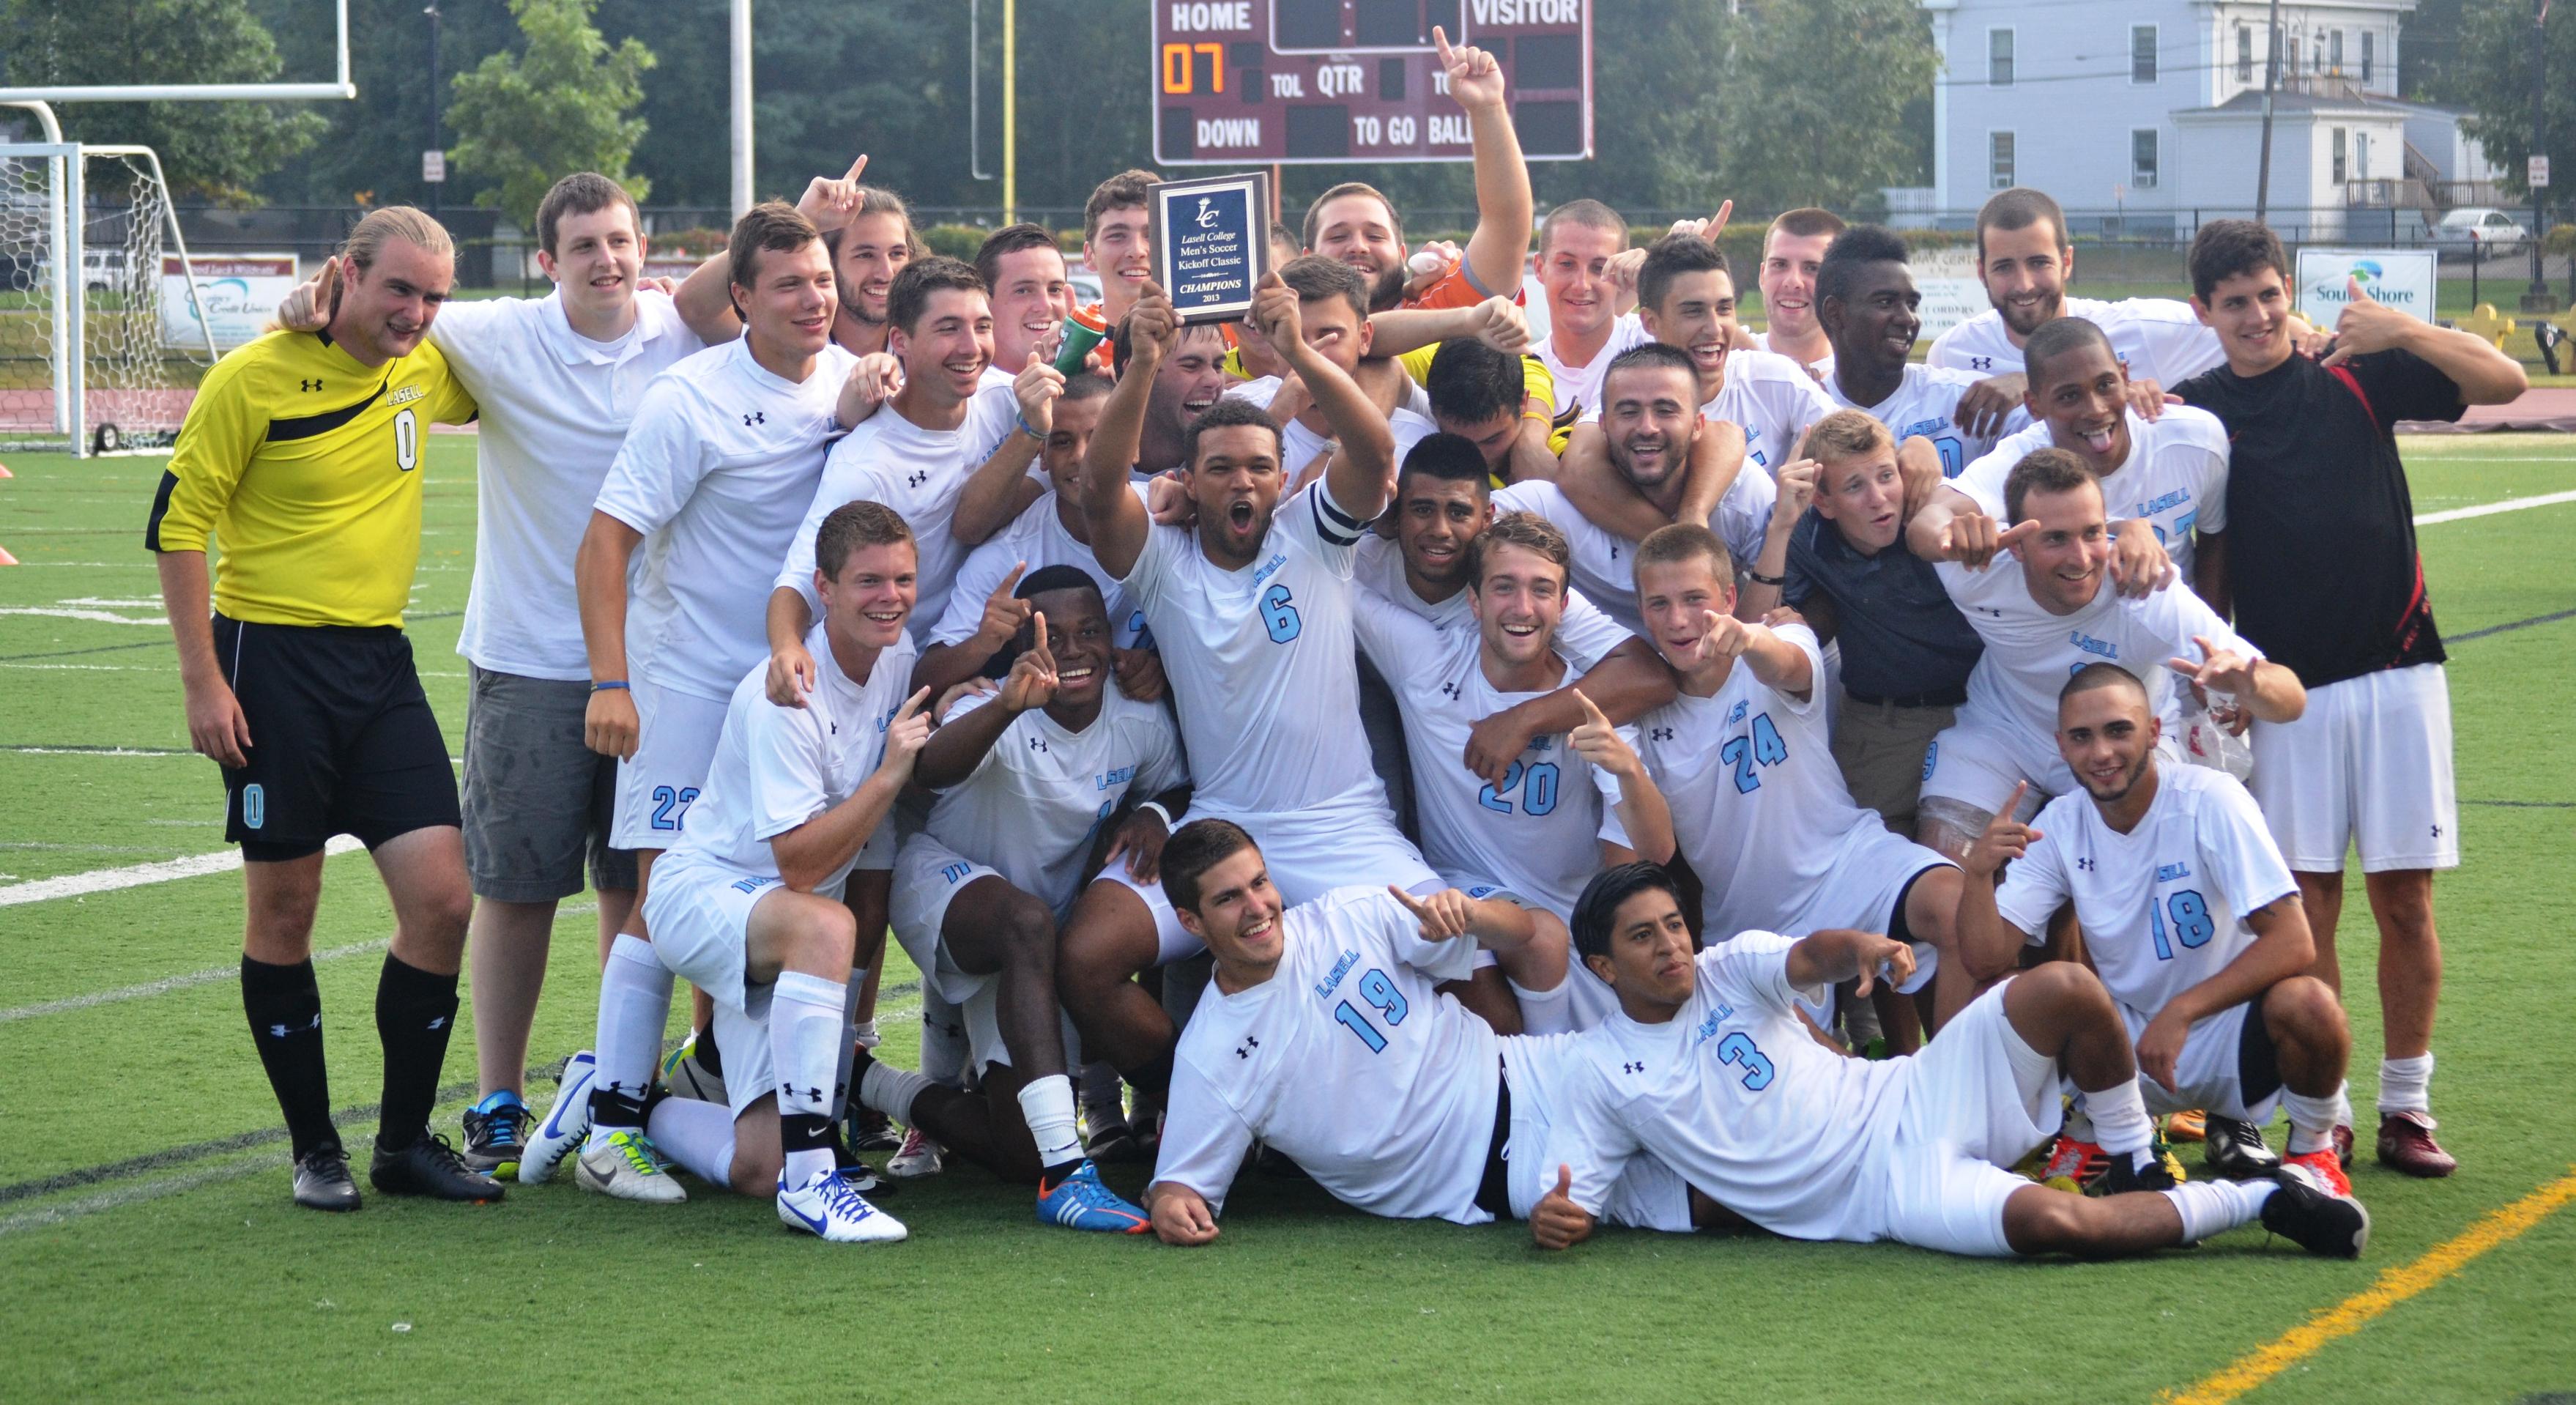 Men's Soccer Claims Kick-Off Classic Title, 2-0 over Fitchburg St.